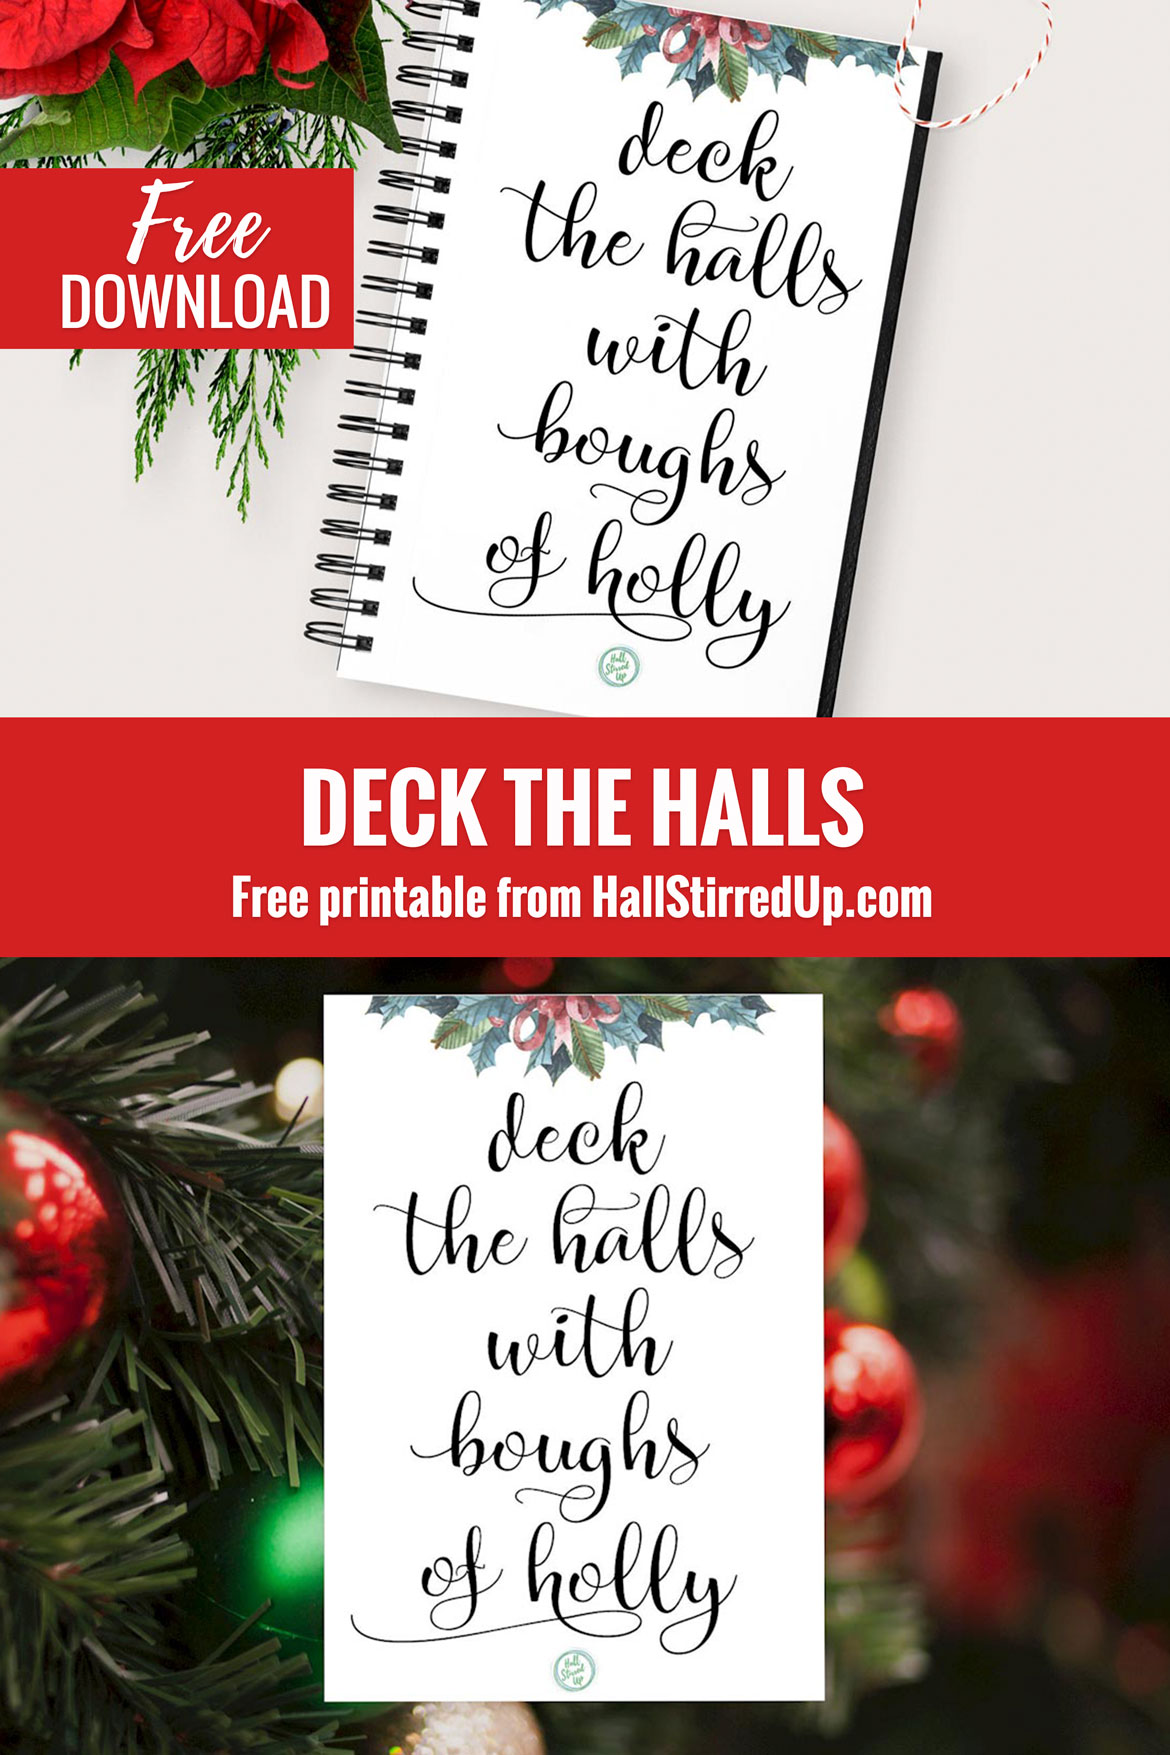 Deck the Halls! It's a free printable for the Holidays :)